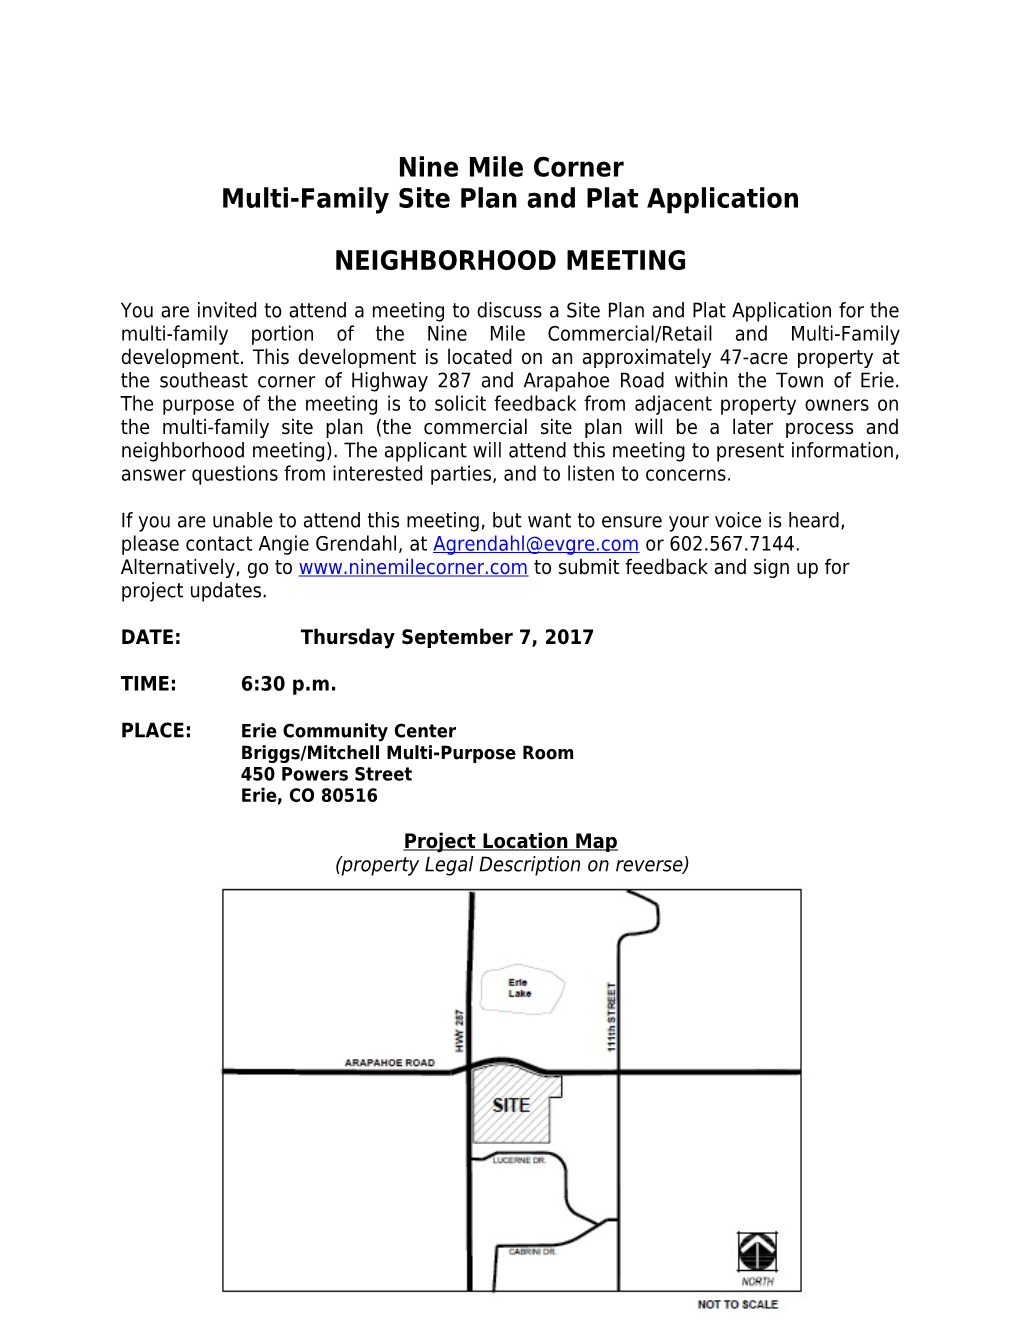 Multi-Family Site Plan and Plat Application